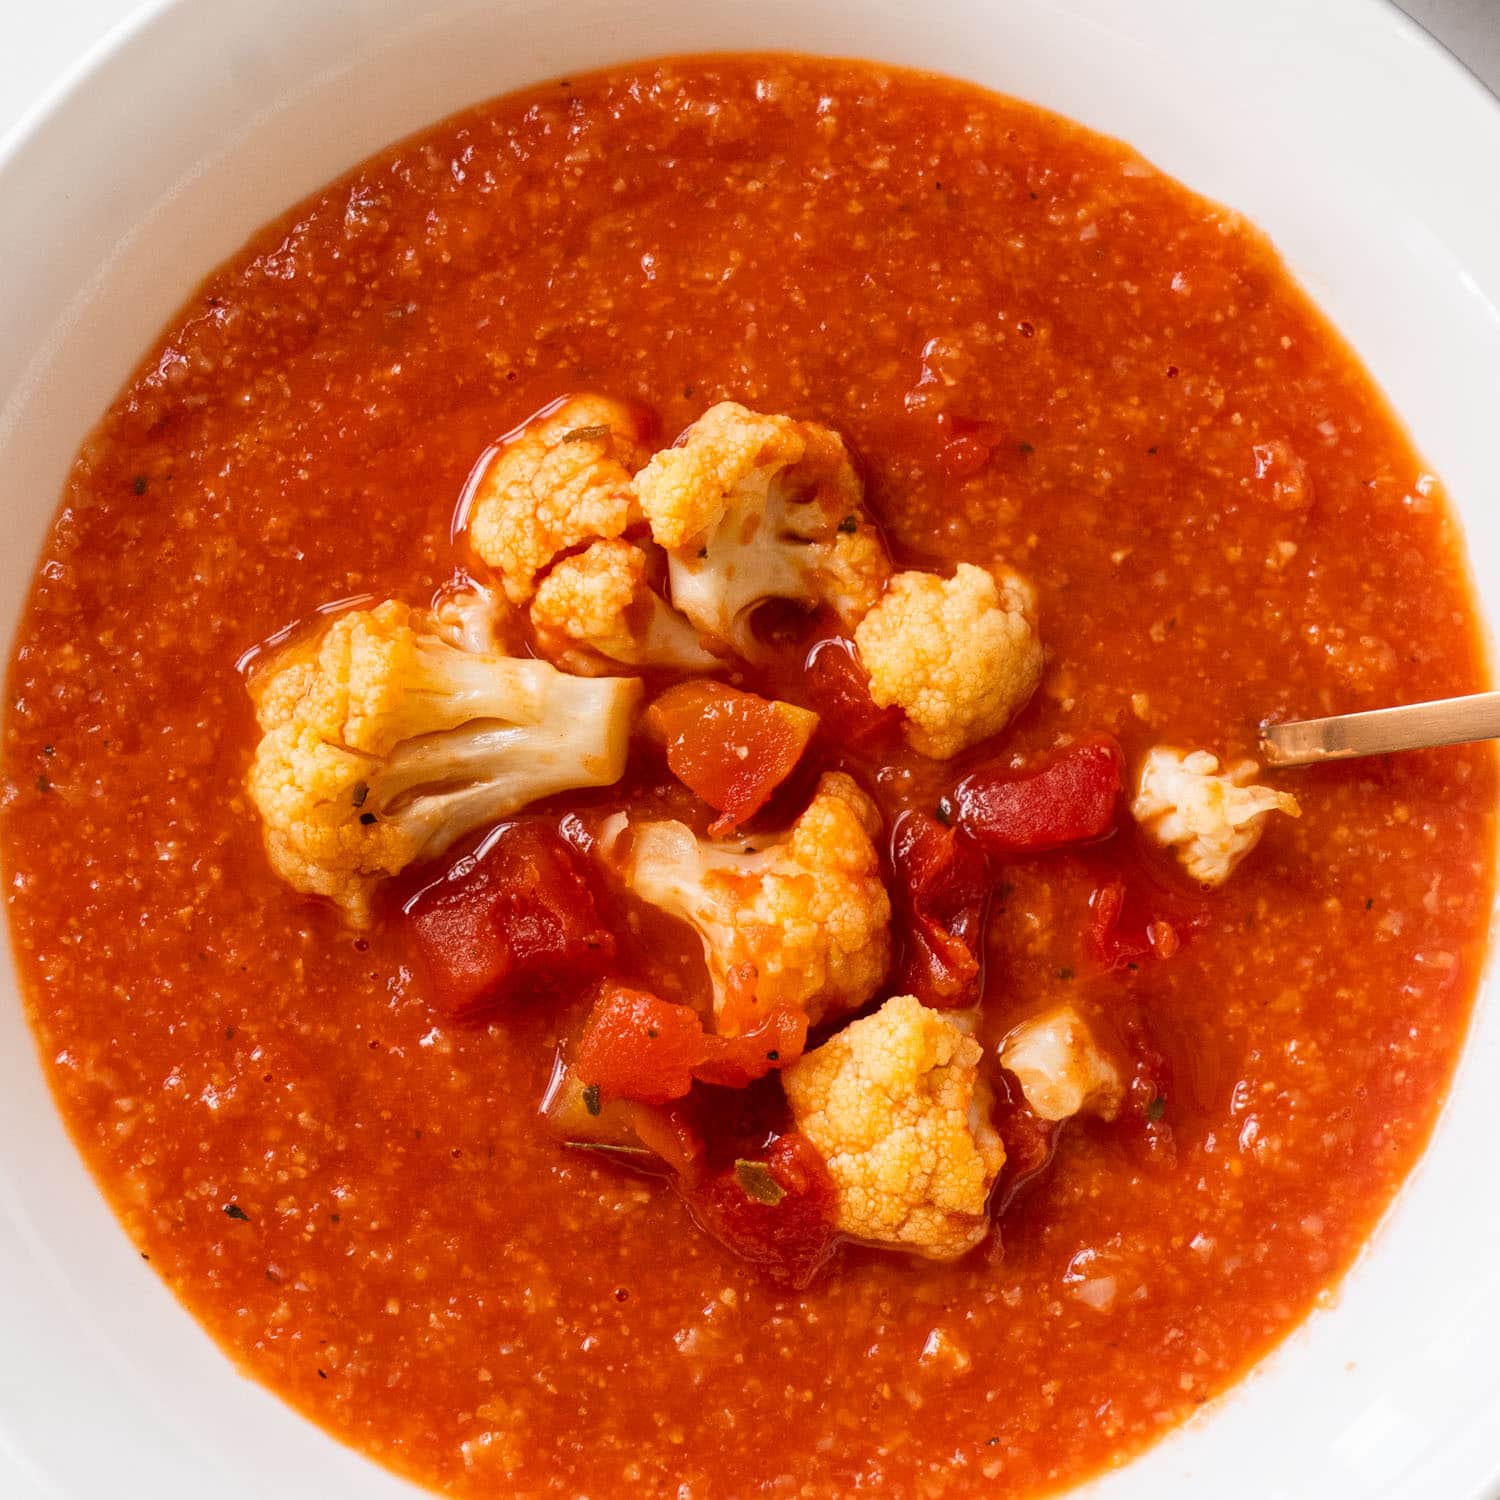 https://brooklynfarmgirl.com/wp-content/uploads/2019/11/Tomato-Soup-with-Cauliflower-Featured-Image.jpg